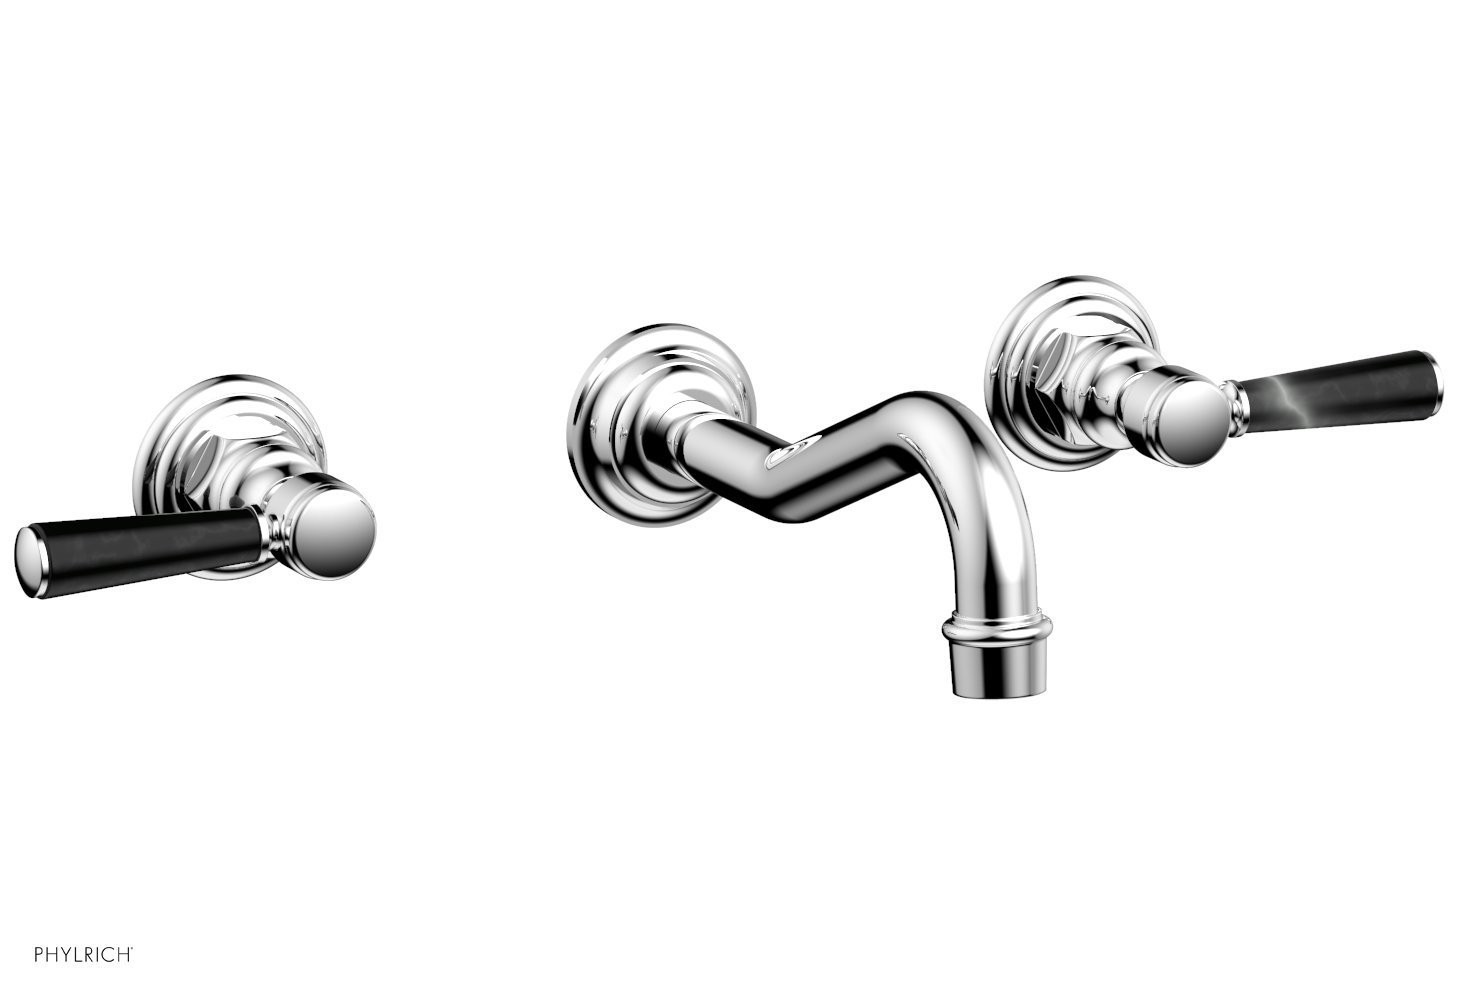 PHYLRICH 161-58-032 HENRI THREE HOLES WIDESPREAD WALL TUB SET WITH SOAP STONE LEVER HANDLES